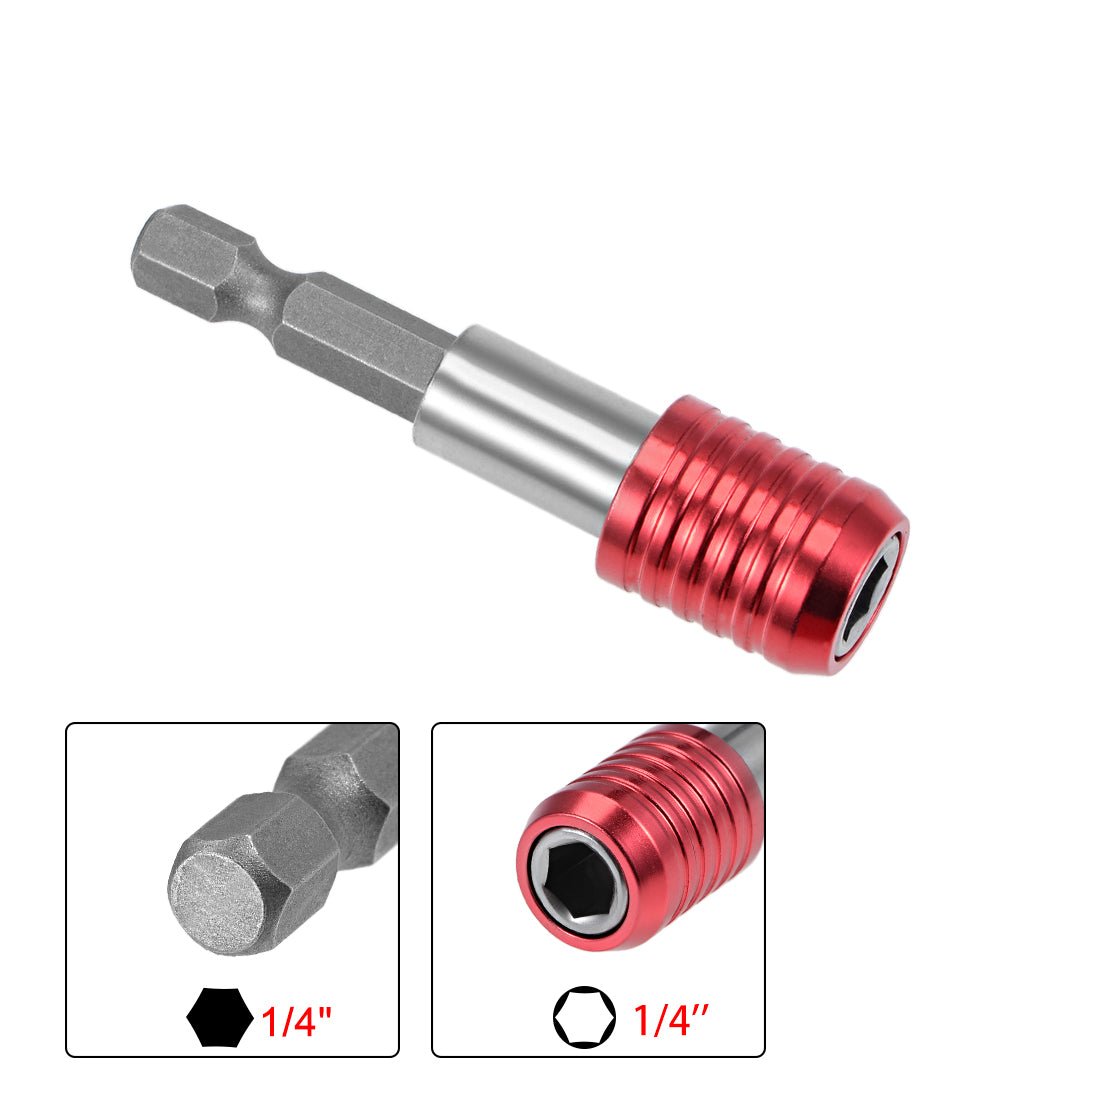 uxcell Uxcell Extension Extend Socket Drill Bit Holder, Magnetic Hex Screwdriver Power Tools ,2.4-inch Length,1/4''-Hexagon Drill Red